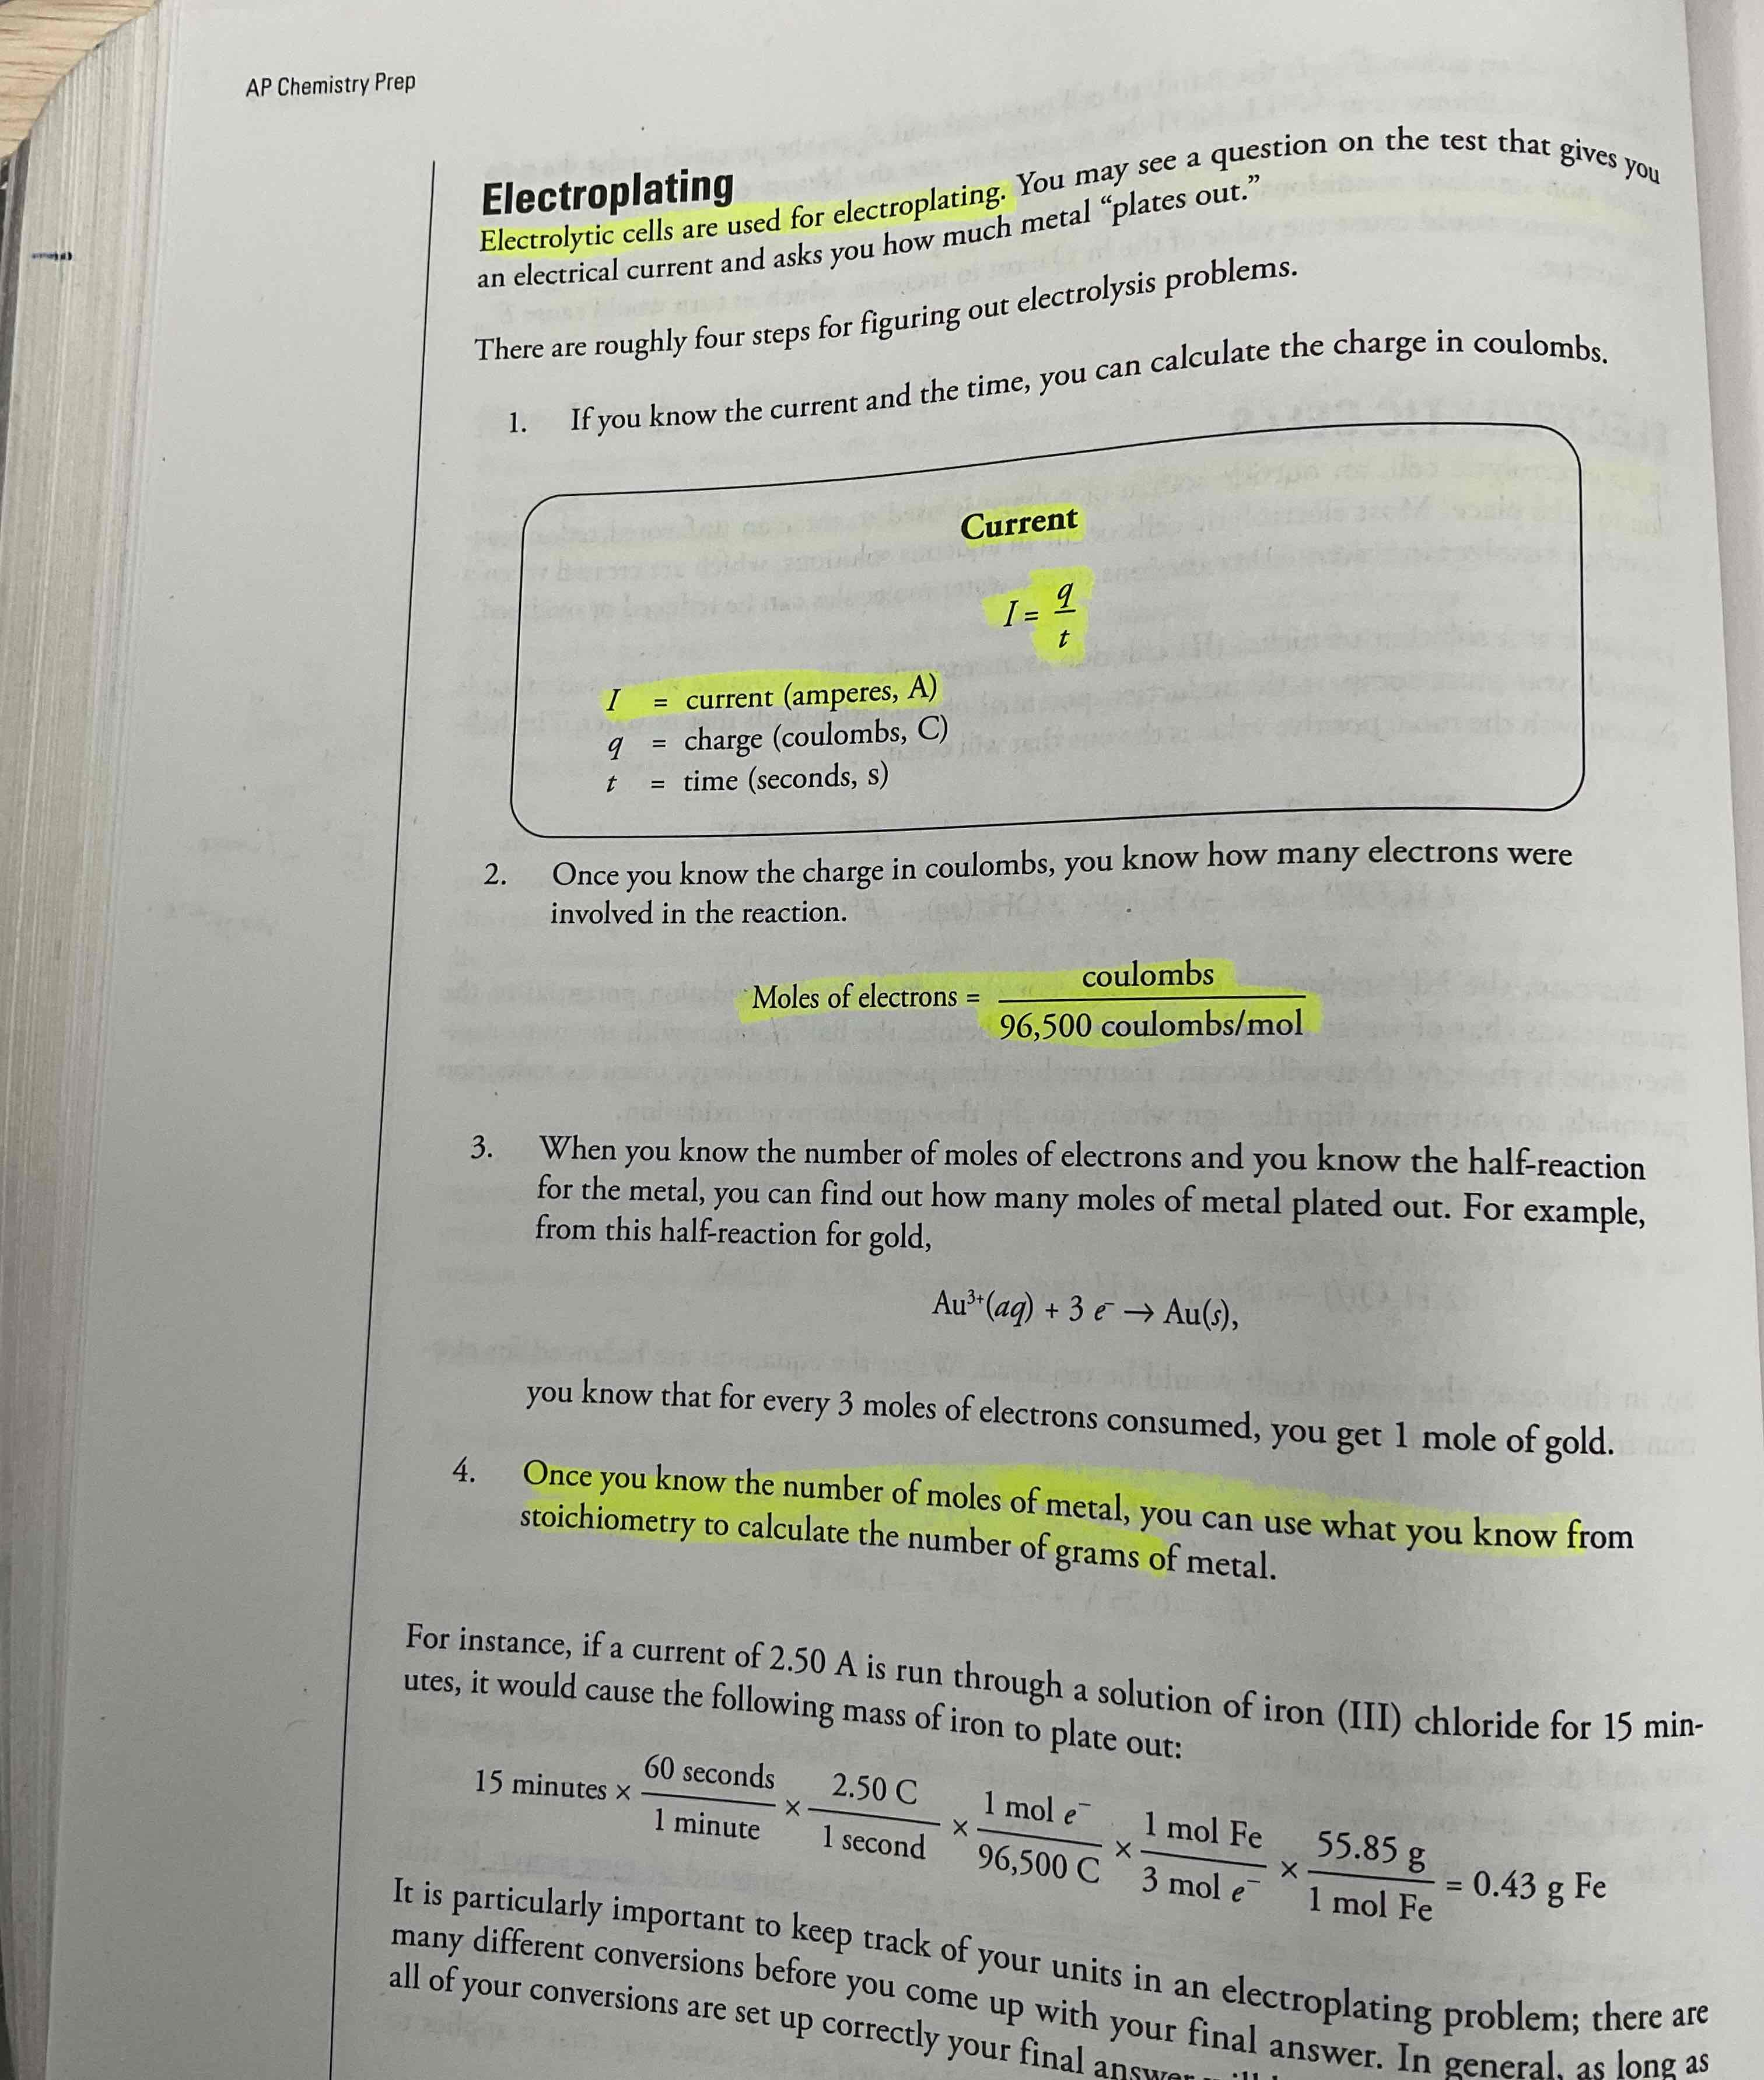 <p>Use stoichiometry to calculate electroplating problems,</p><p>Electroplating is a process where well use electrical current and see how much metal “plates out”</p>